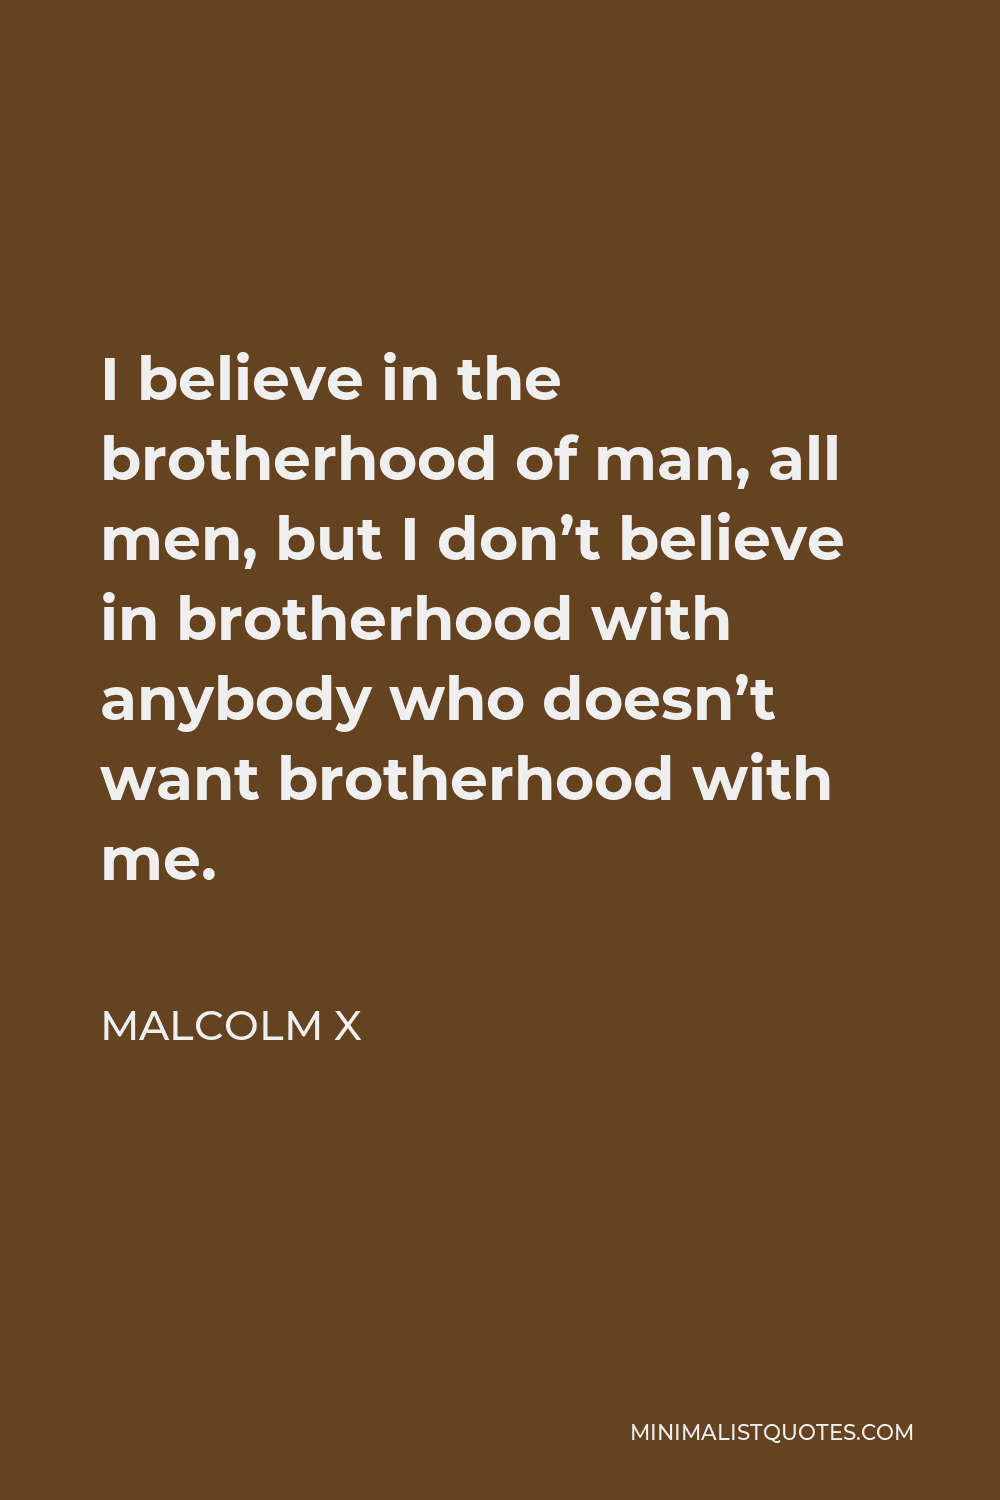 Malcolm X Quote - I believe in the brotherhood of man, all men, but I don’t believe in brotherhood with anybody who doesn’t want brotherhood with me.